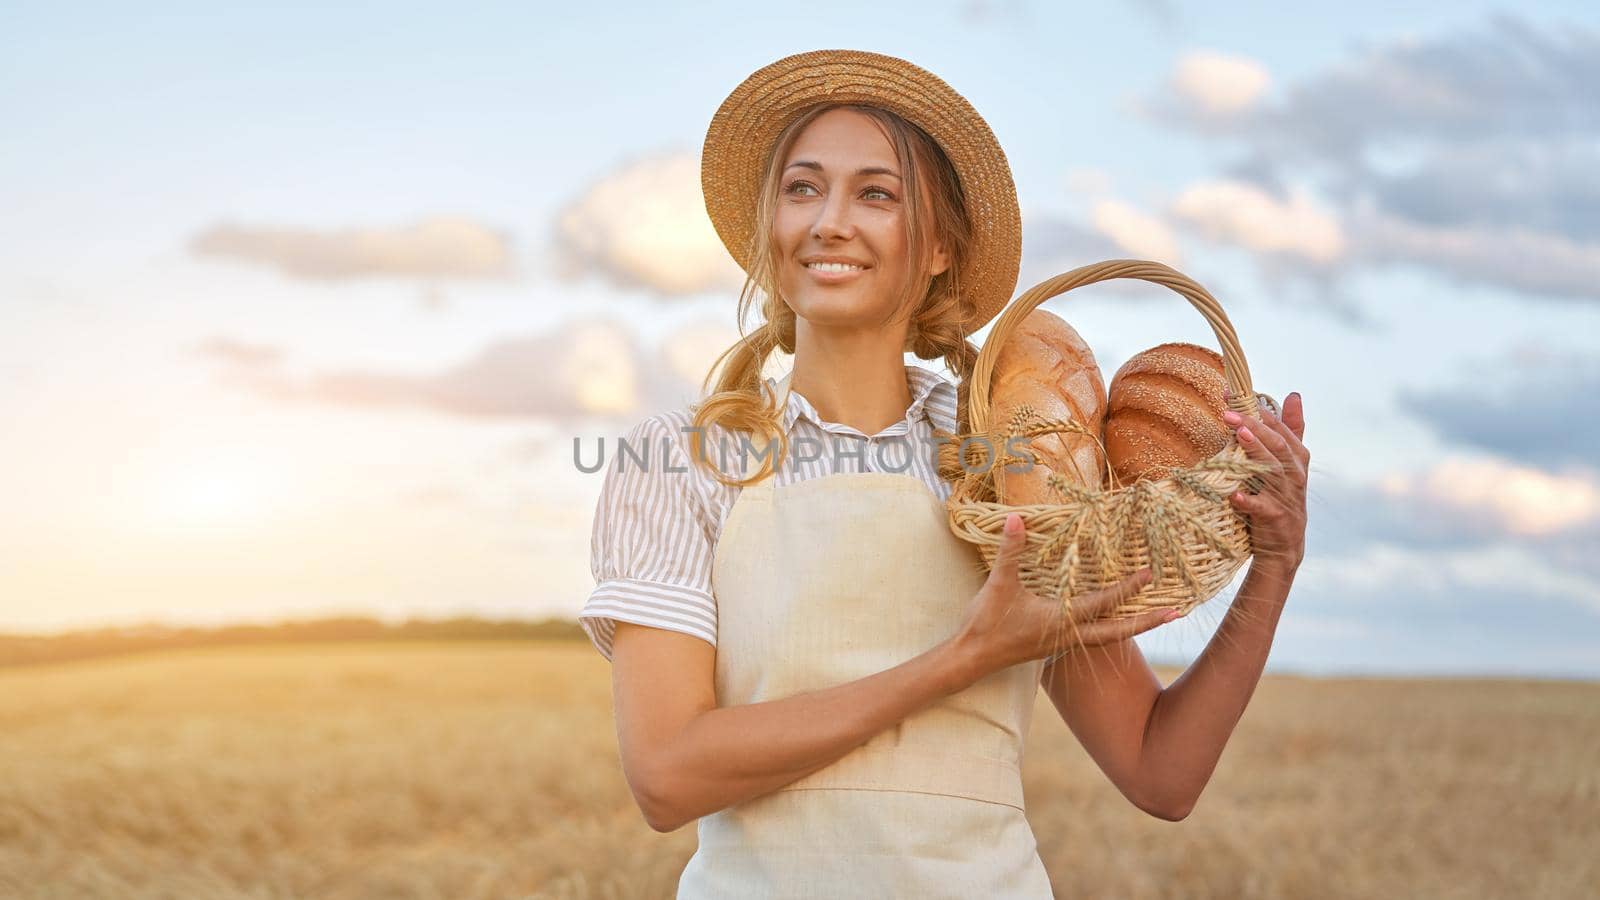 Female farmer standing wheat agricultural field Woman baker holding wicker basket bread product by andreonegin